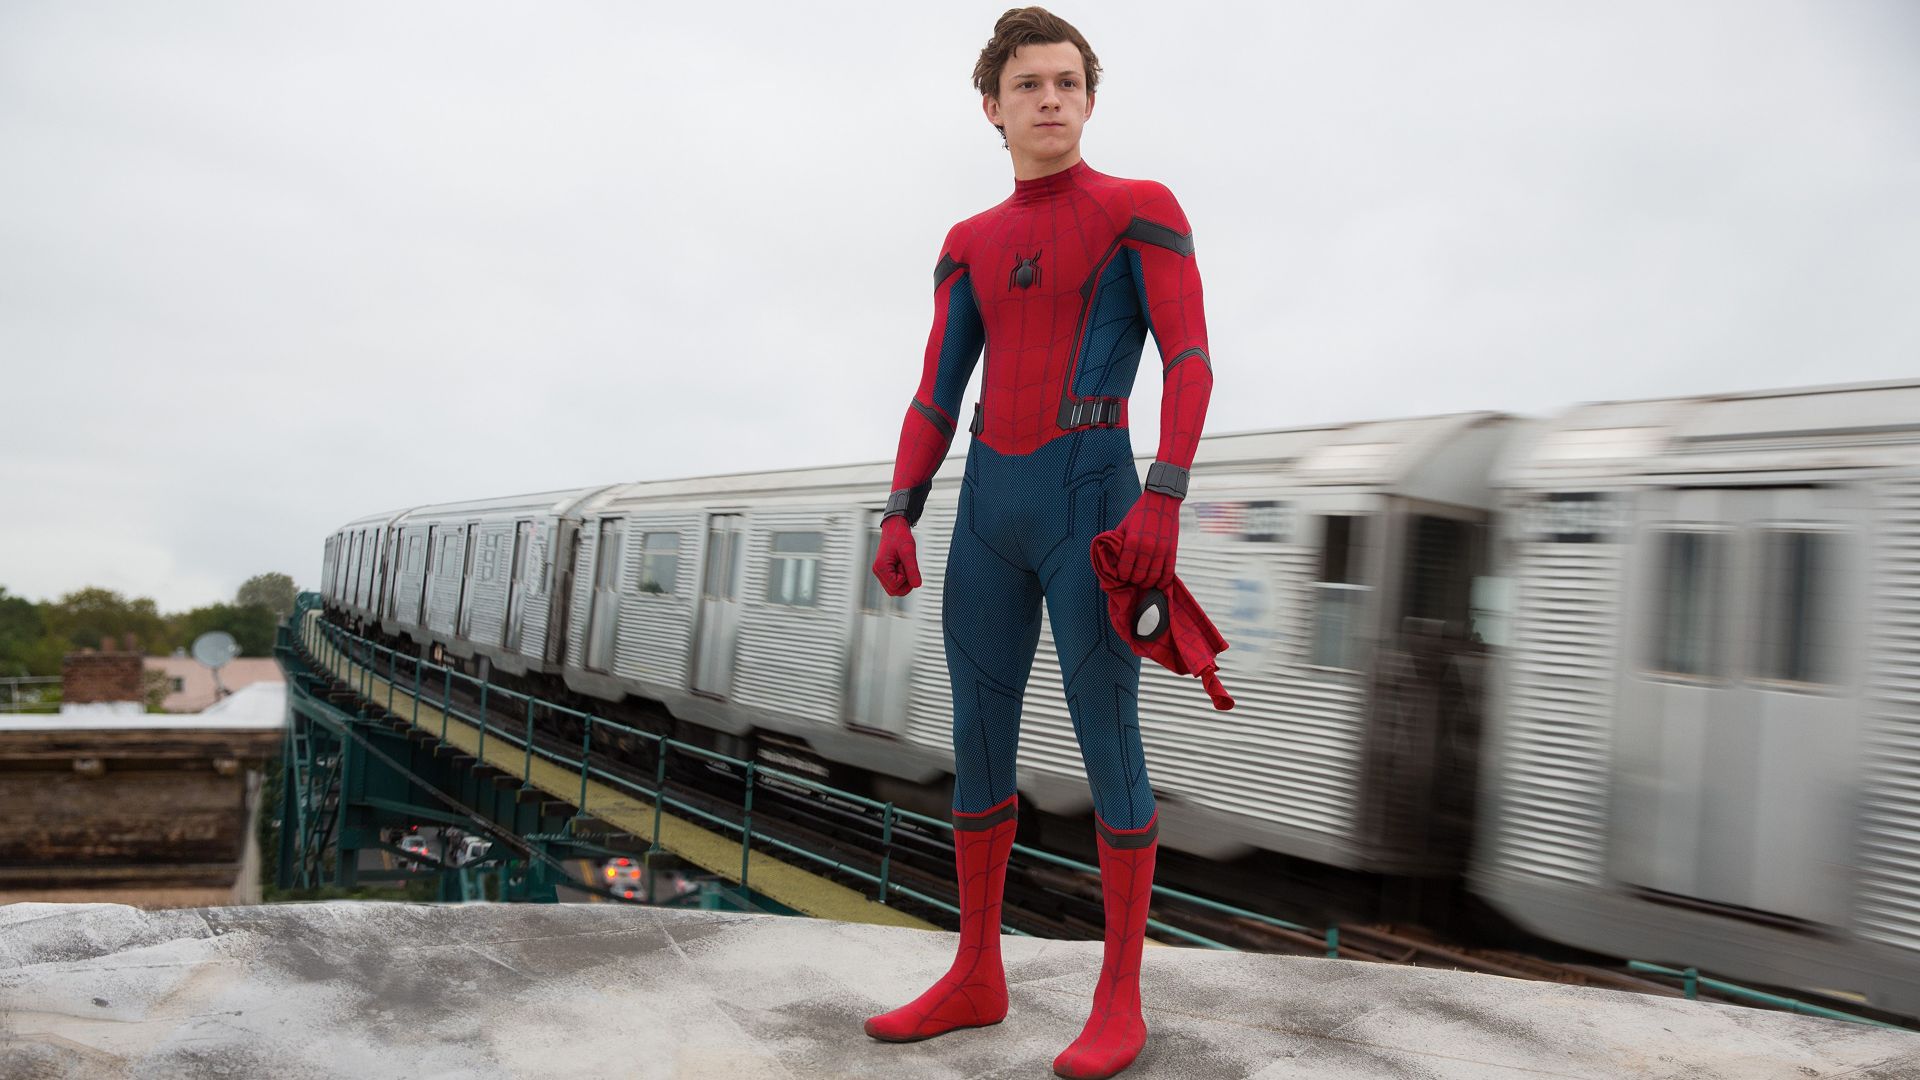 Desktop Wallpaper Spiderman Homecoming 2017 Movie, Tom Holland, Hd Image,  Picture, Background, Hpu1ps